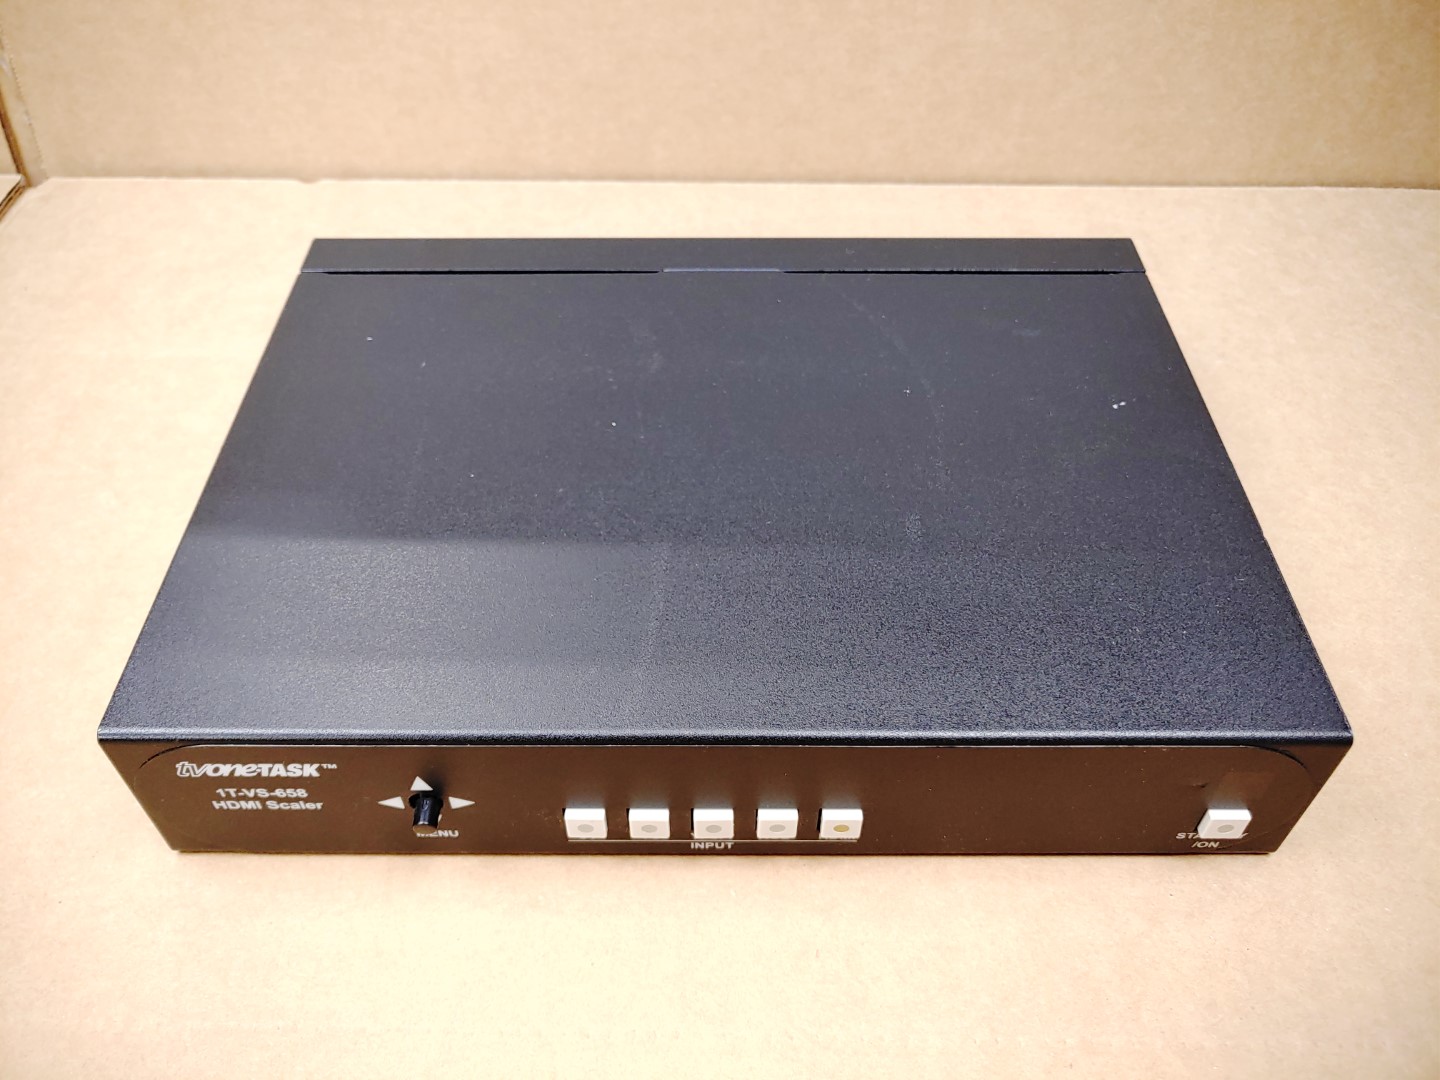 **NO POWER ADAPTER INCLUDED** Good condition! Tested and pulled from a working environment! Item Specifics: MPN : 1T-VS-658UPC : N/ABrand : tvONE-TASKModel : 1T-VS-658Type : HDMI Scaler - 2